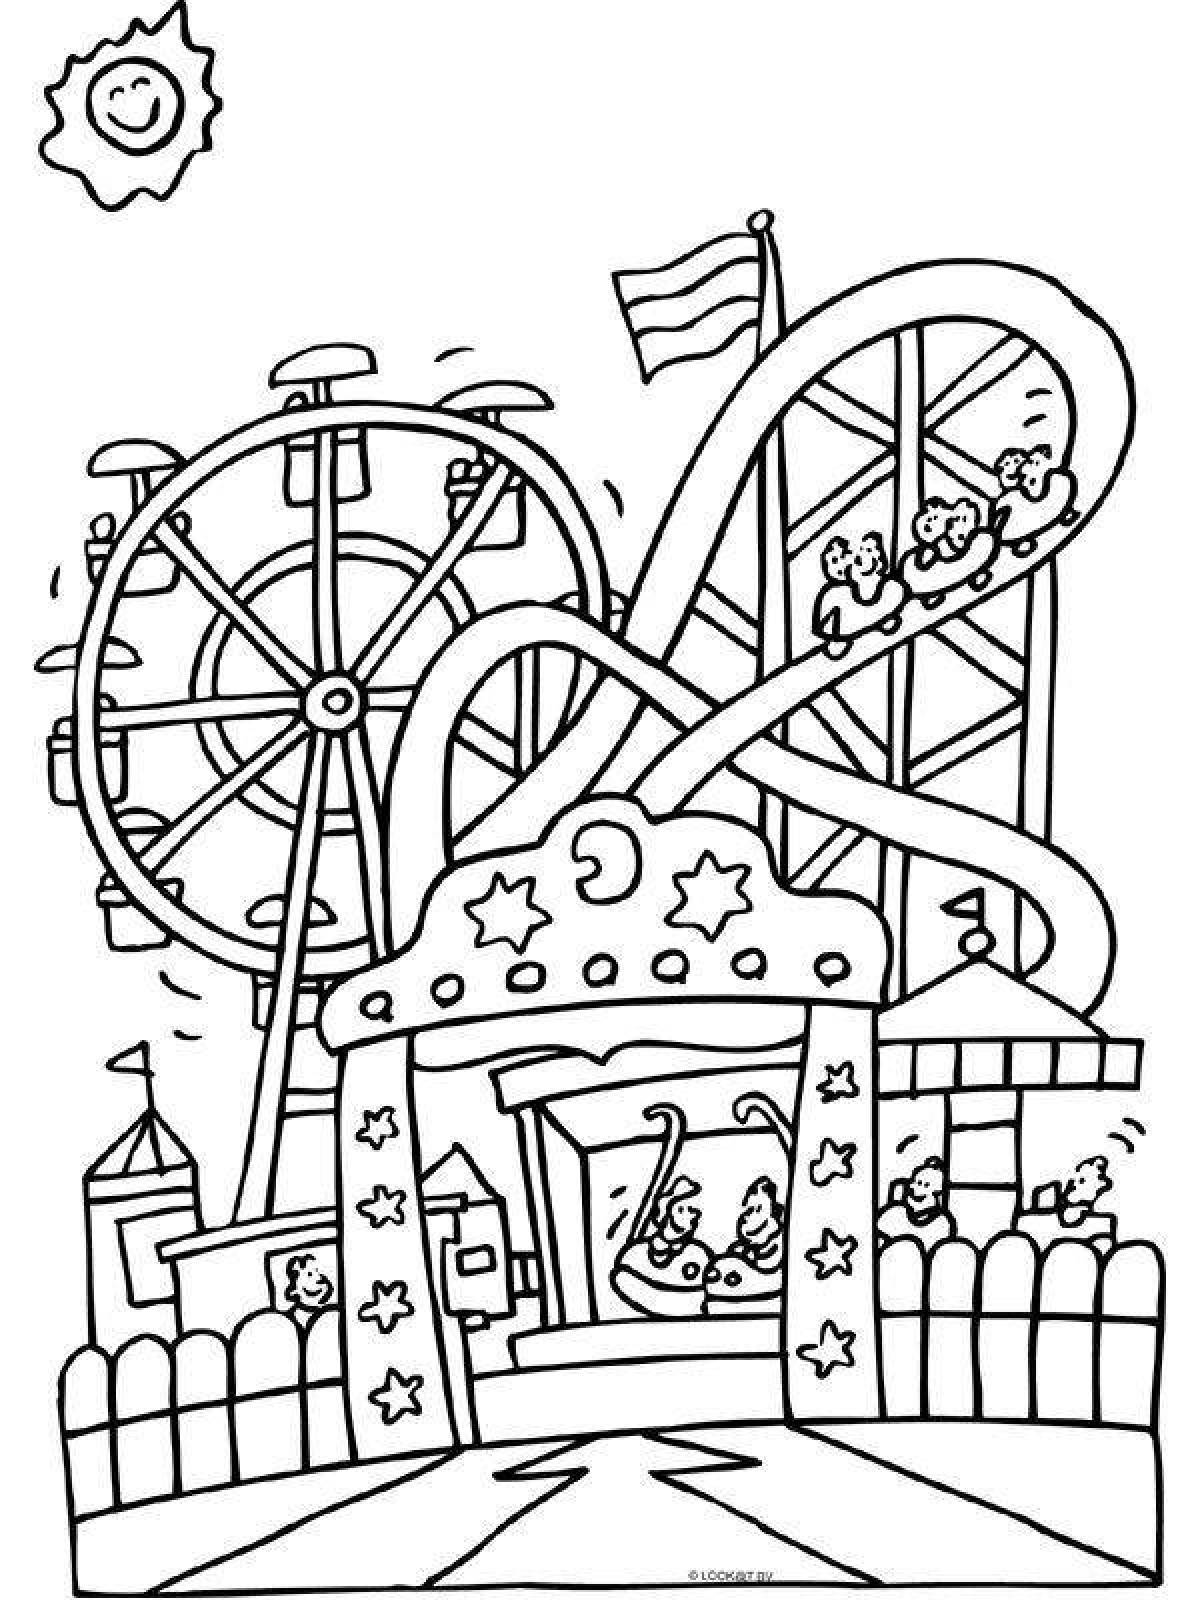 Funny park coloring pages for kids